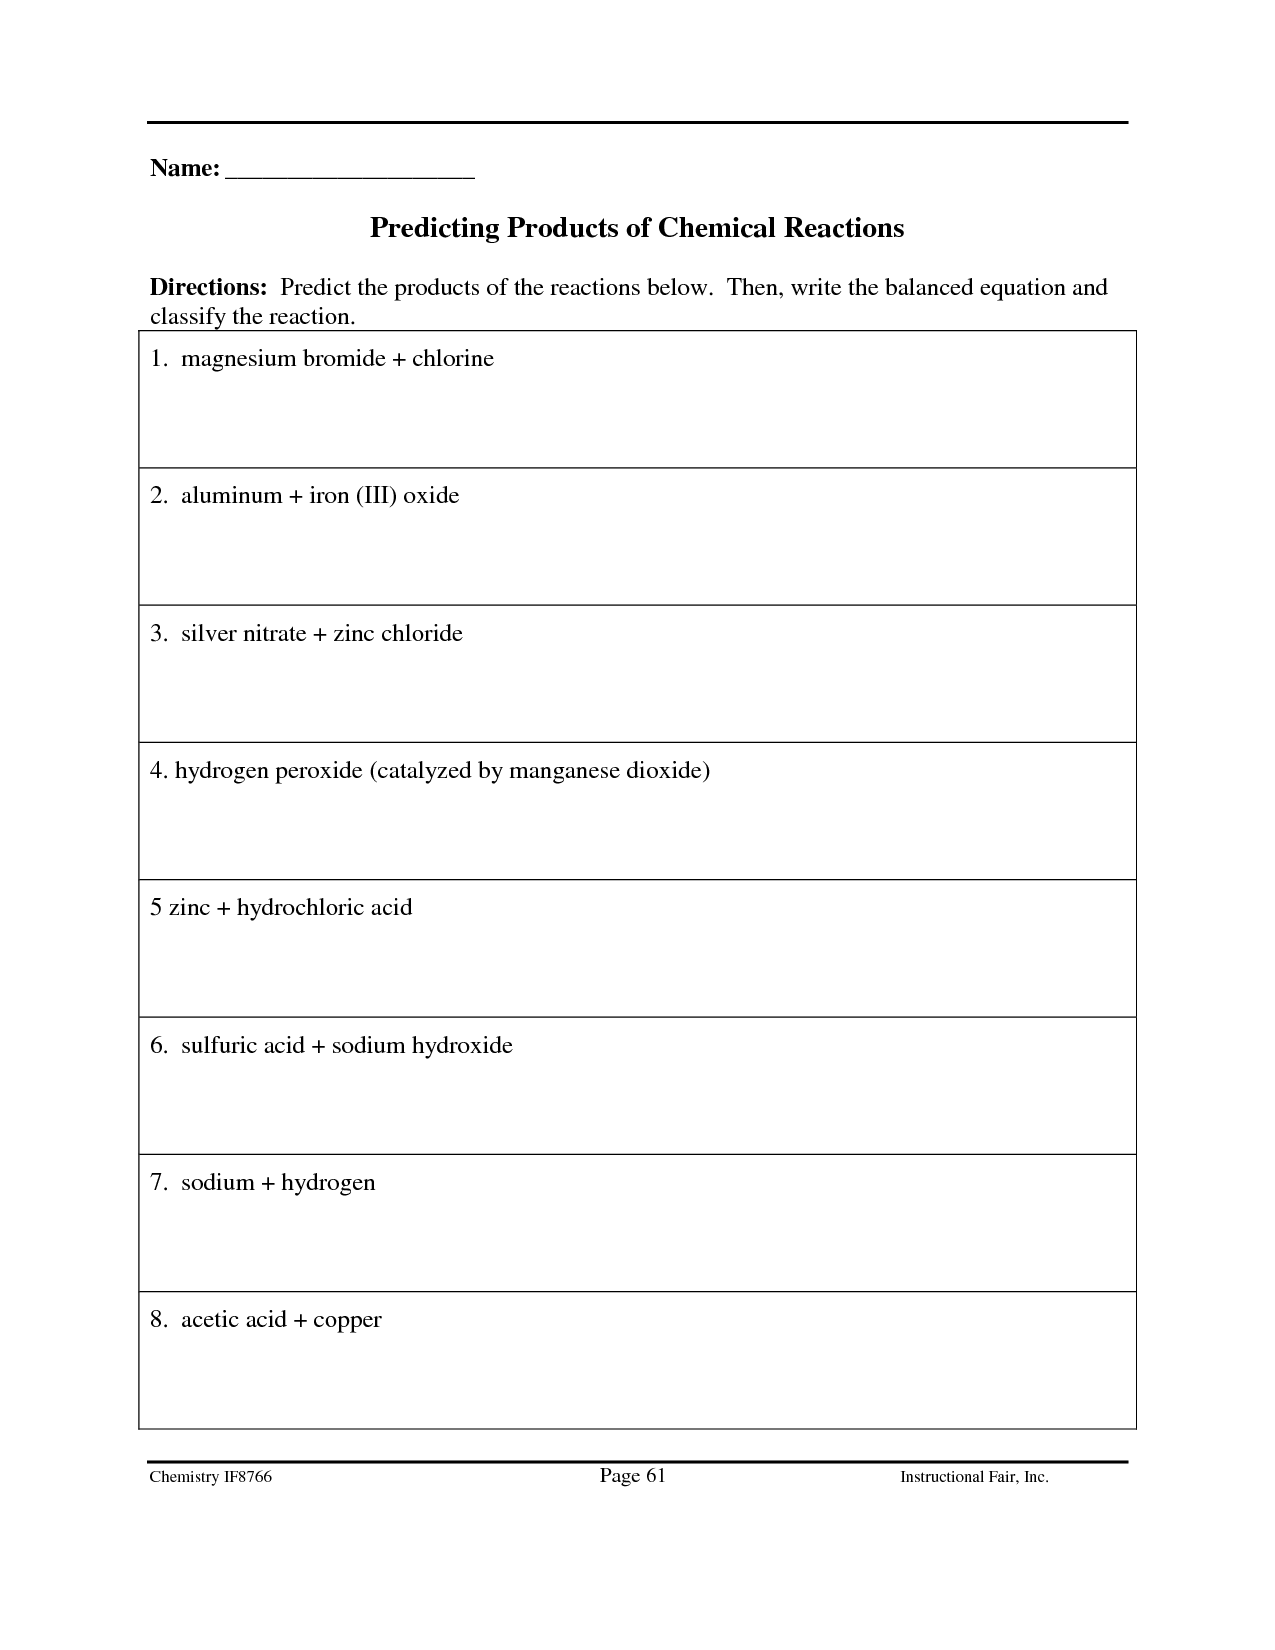 Atomic Structure Review Worksheet